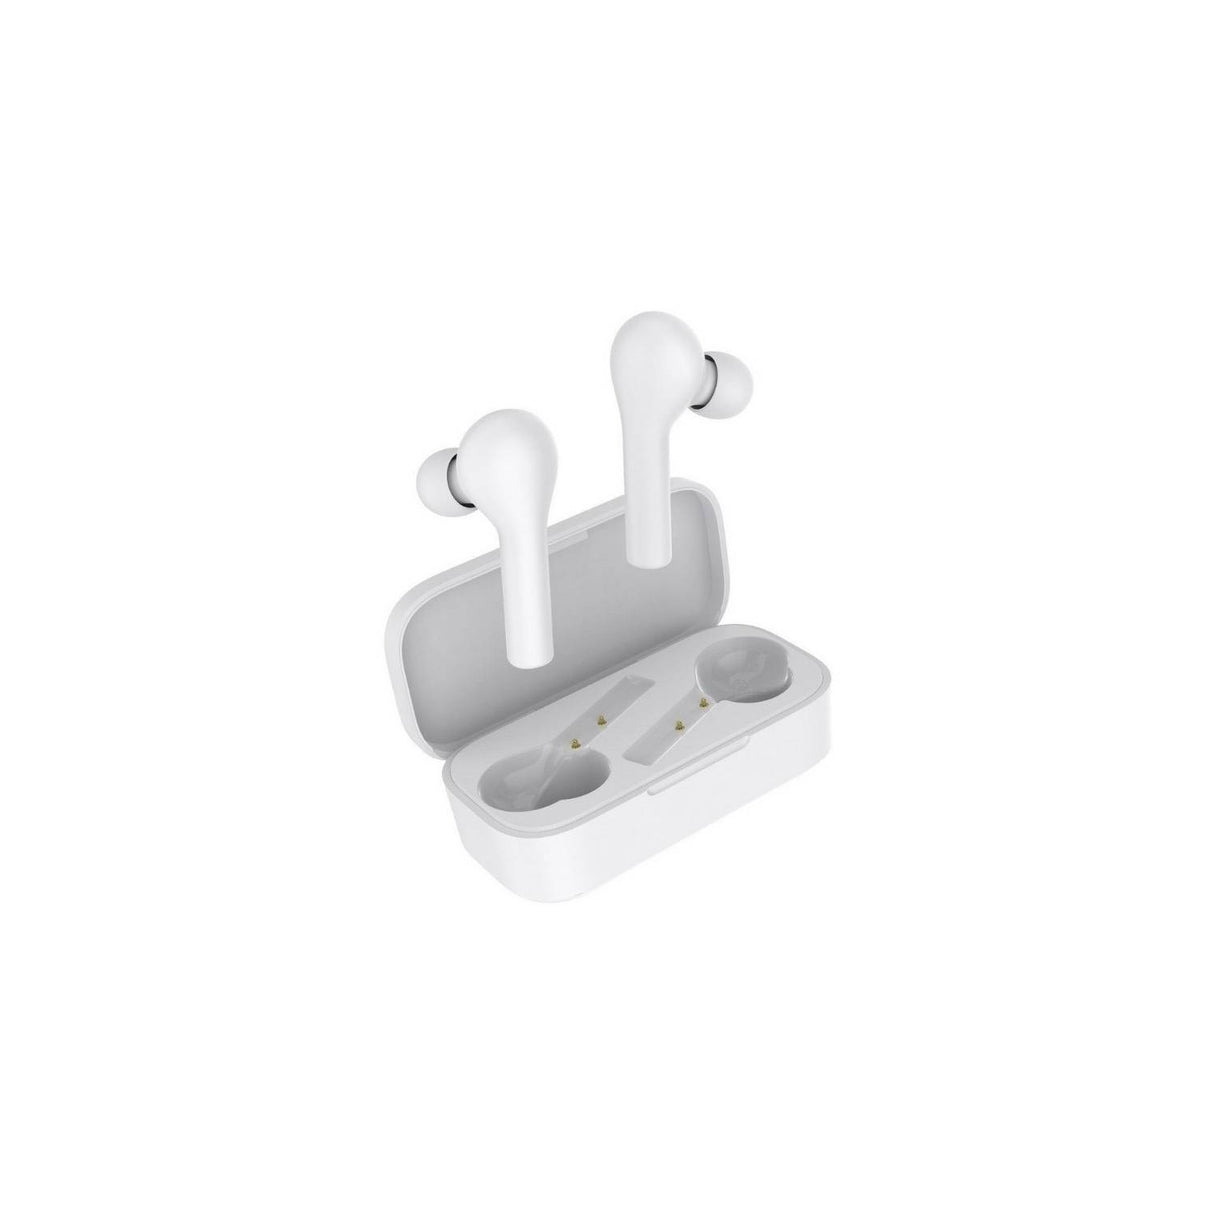 Audifonos Bluetooth In Ear Recargables T5 blanco  QCY